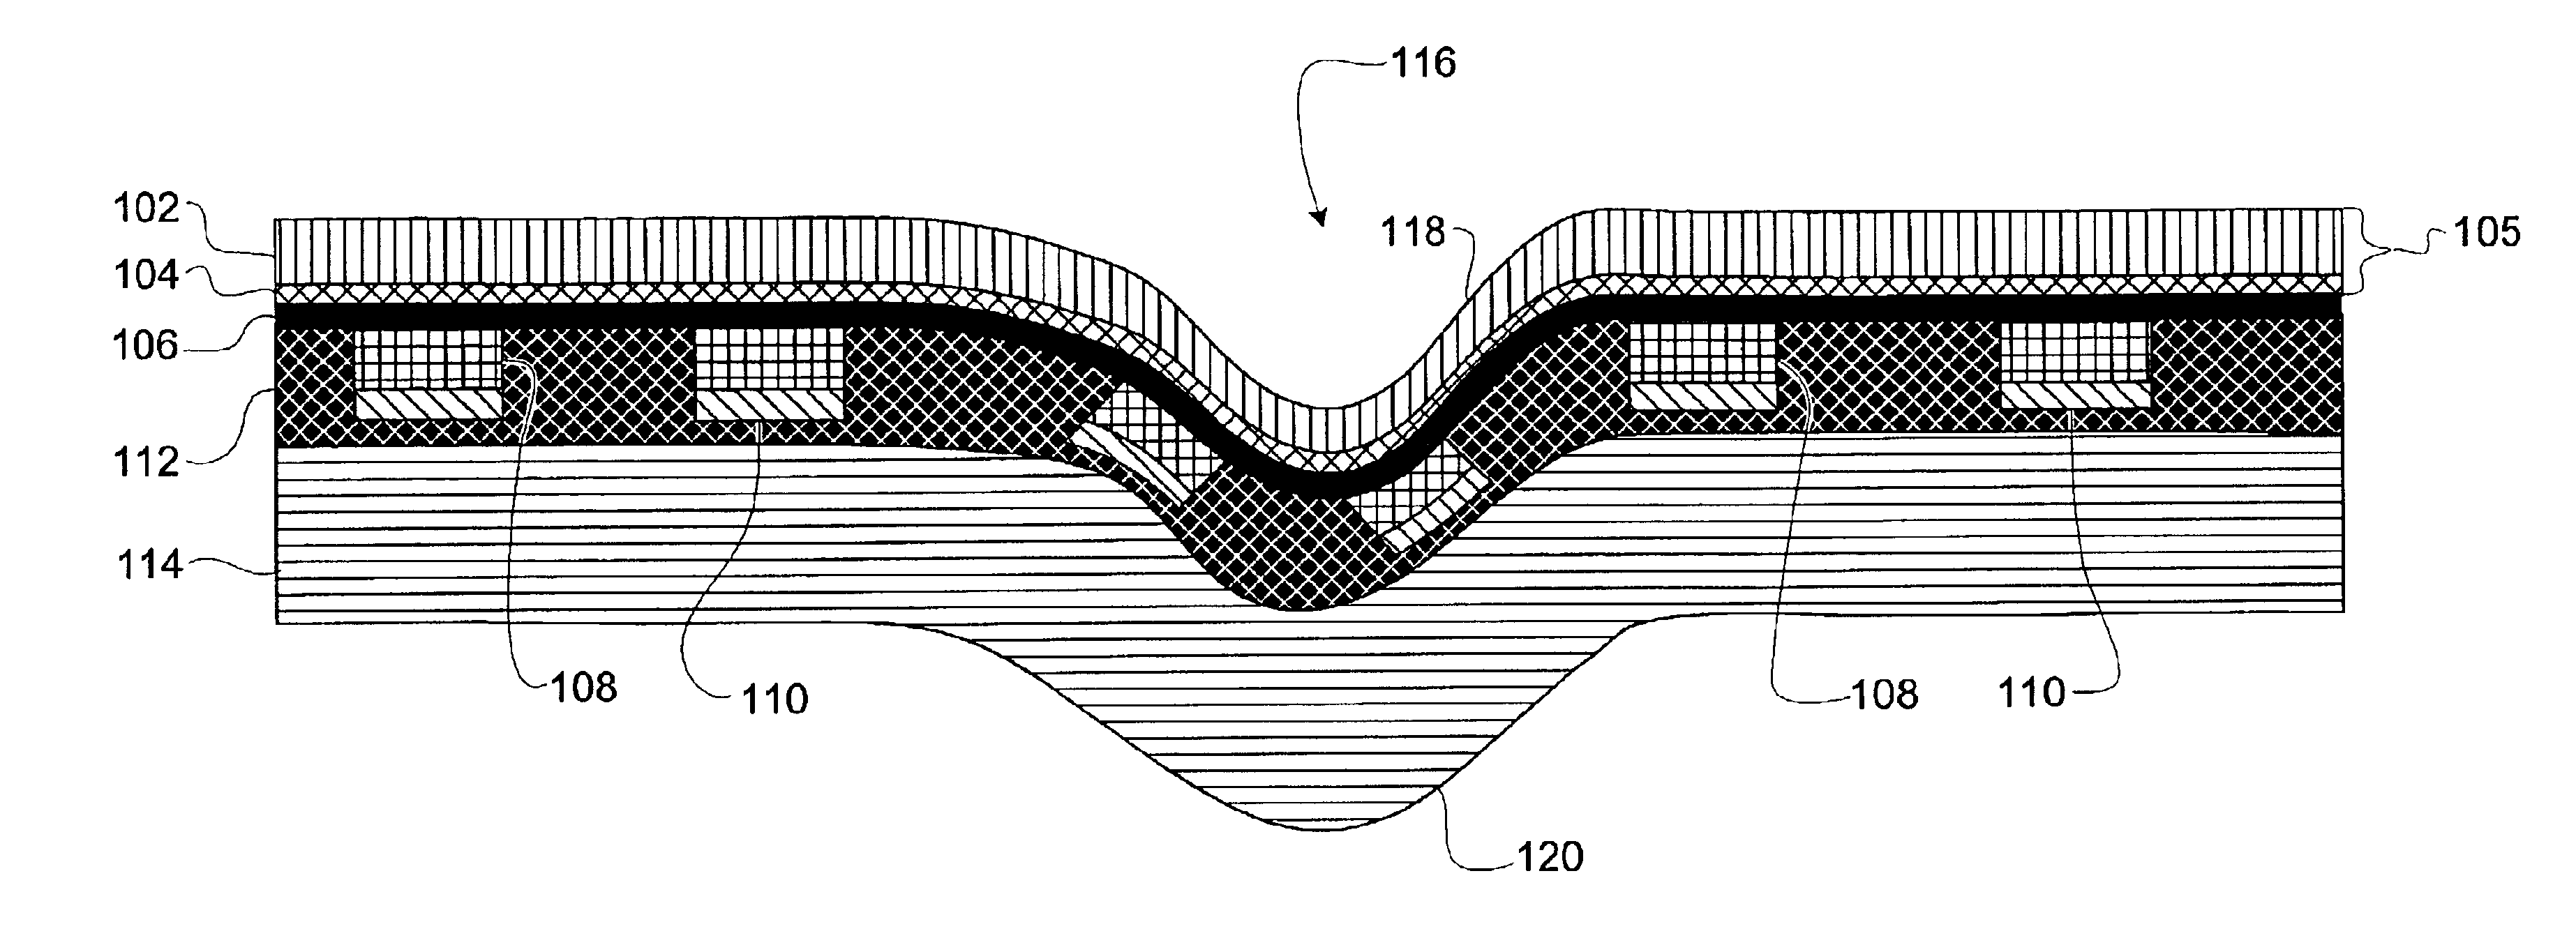 Microwave packaging with indentation patterns